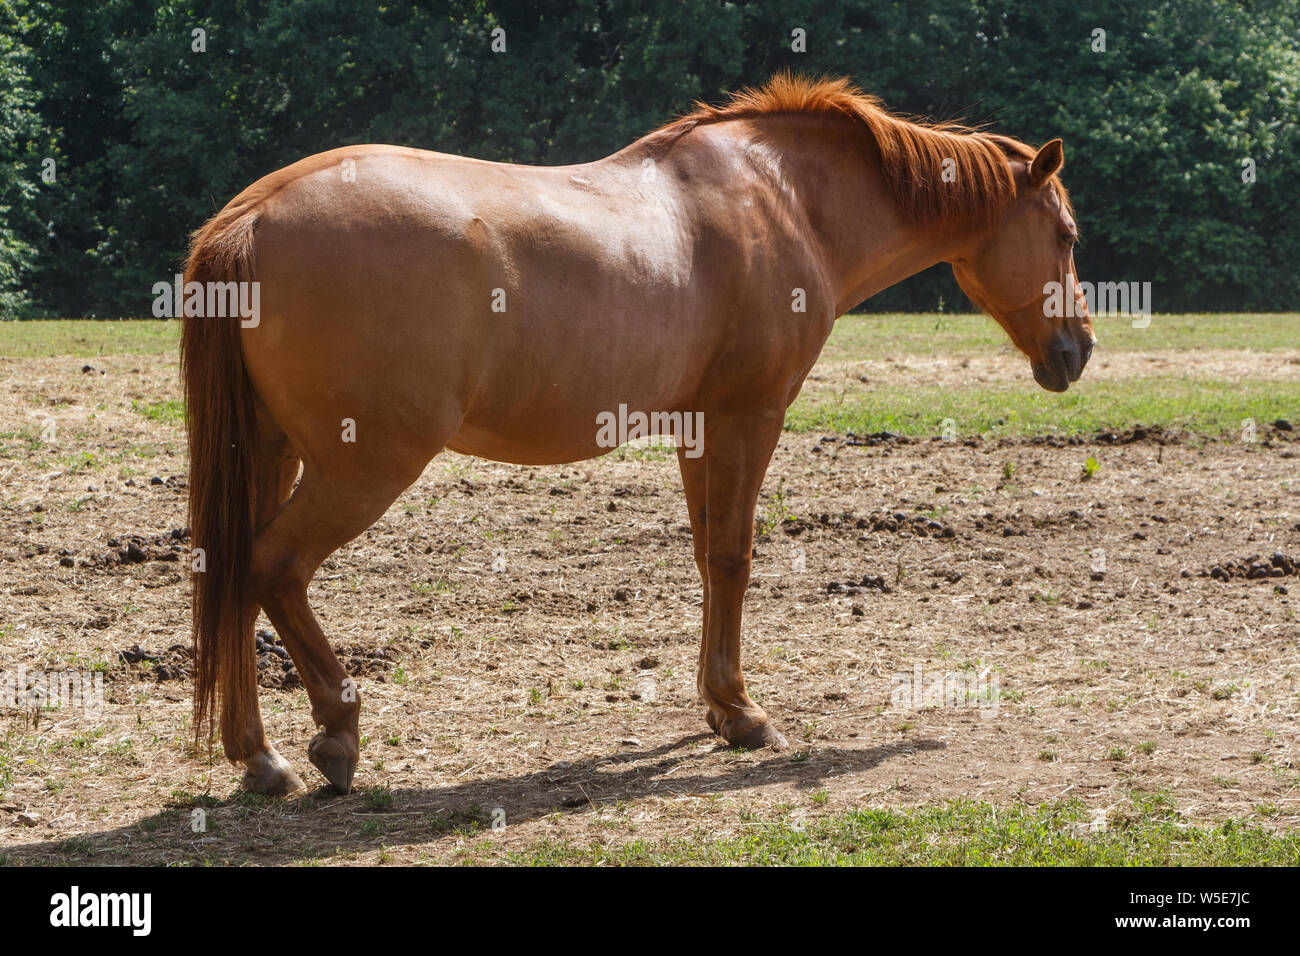 Chestnut horse napping in a field during summer Stock Photo